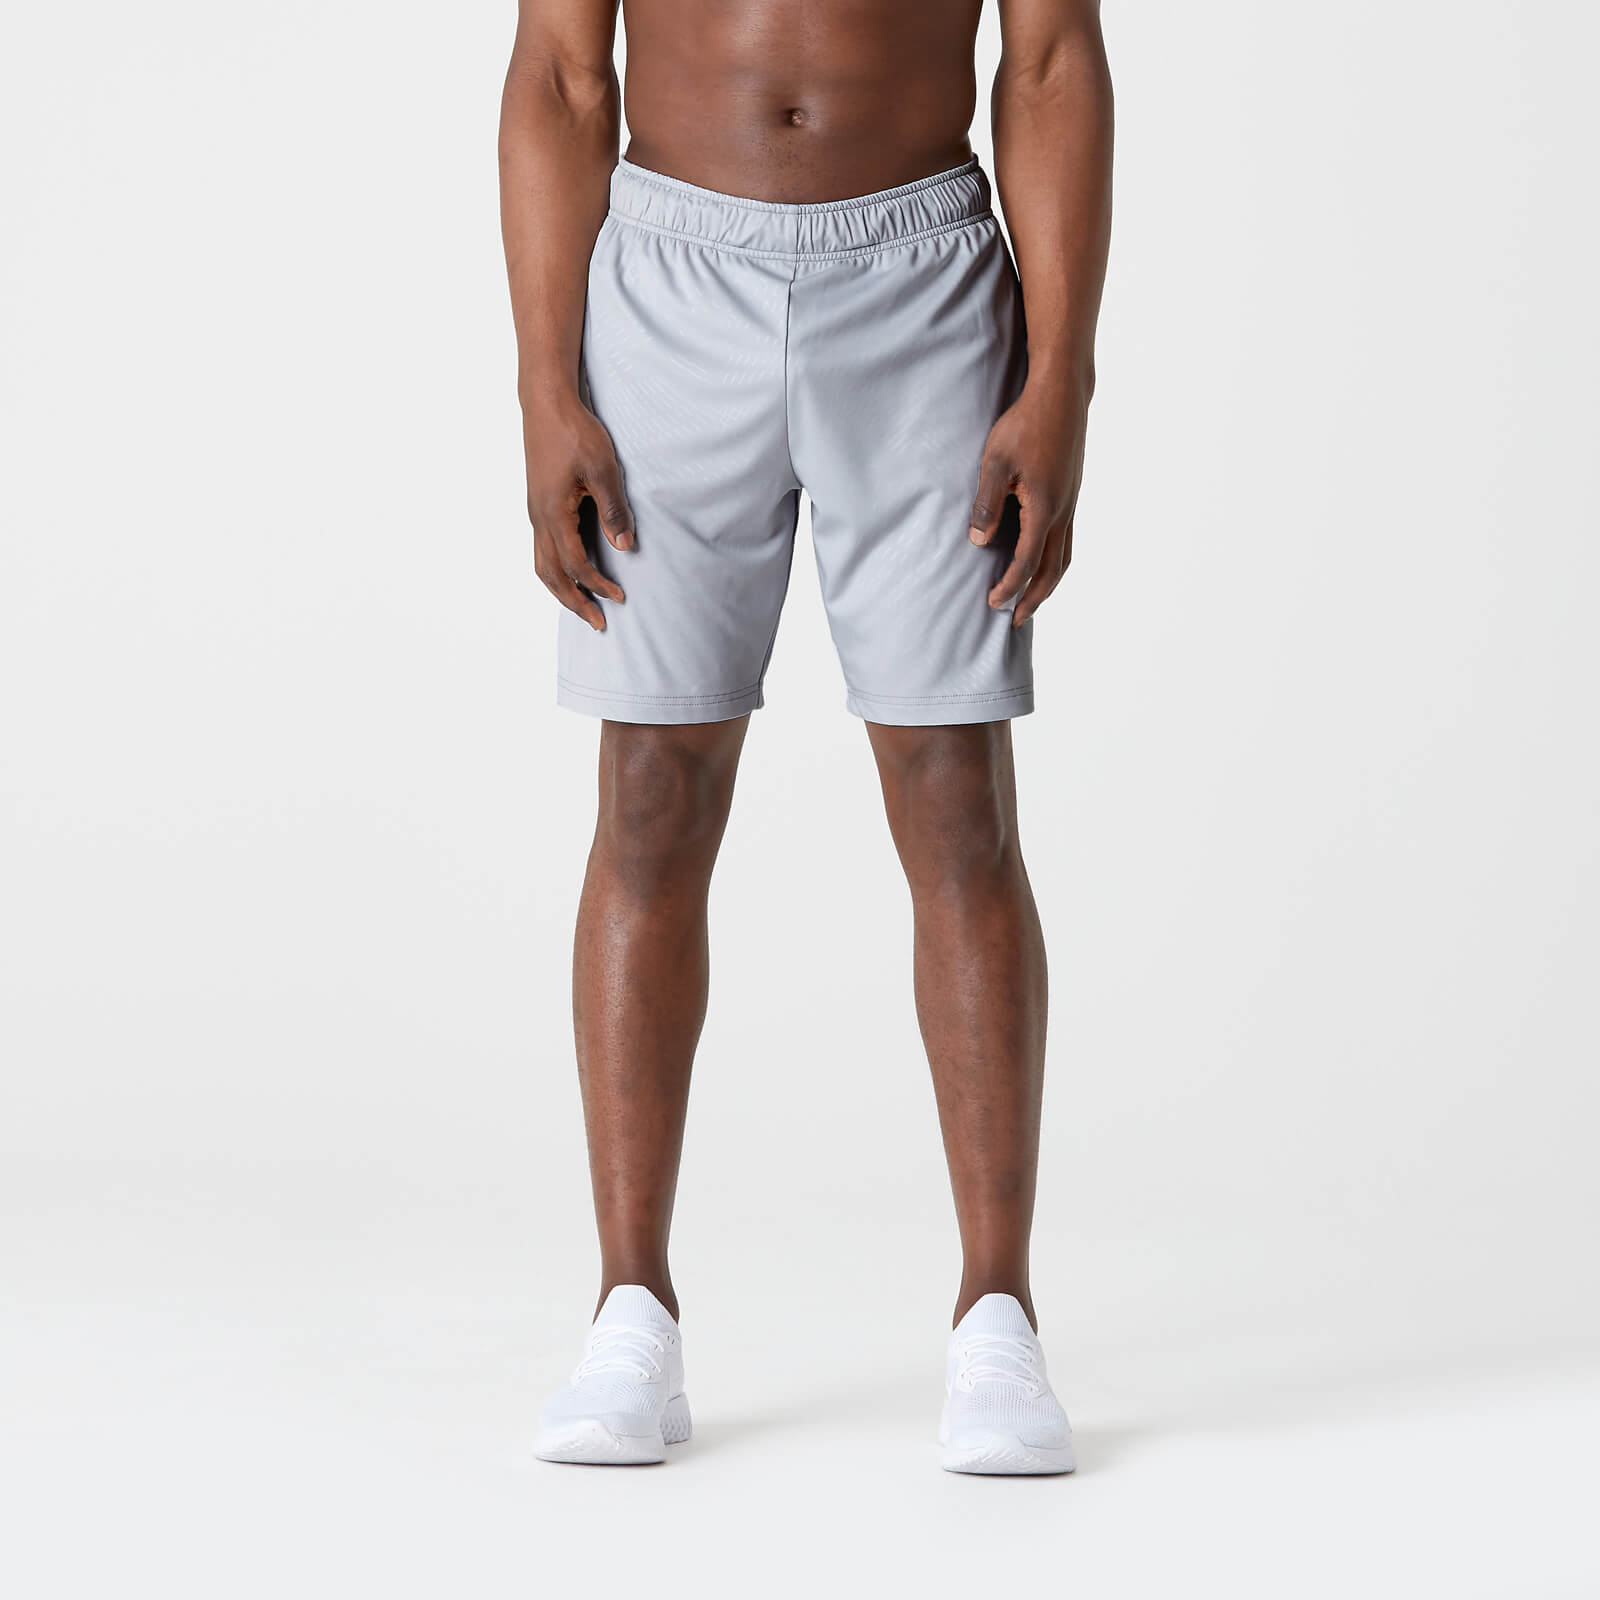 Myprotein Dry-Tech Infinity Shorts - Silver - L